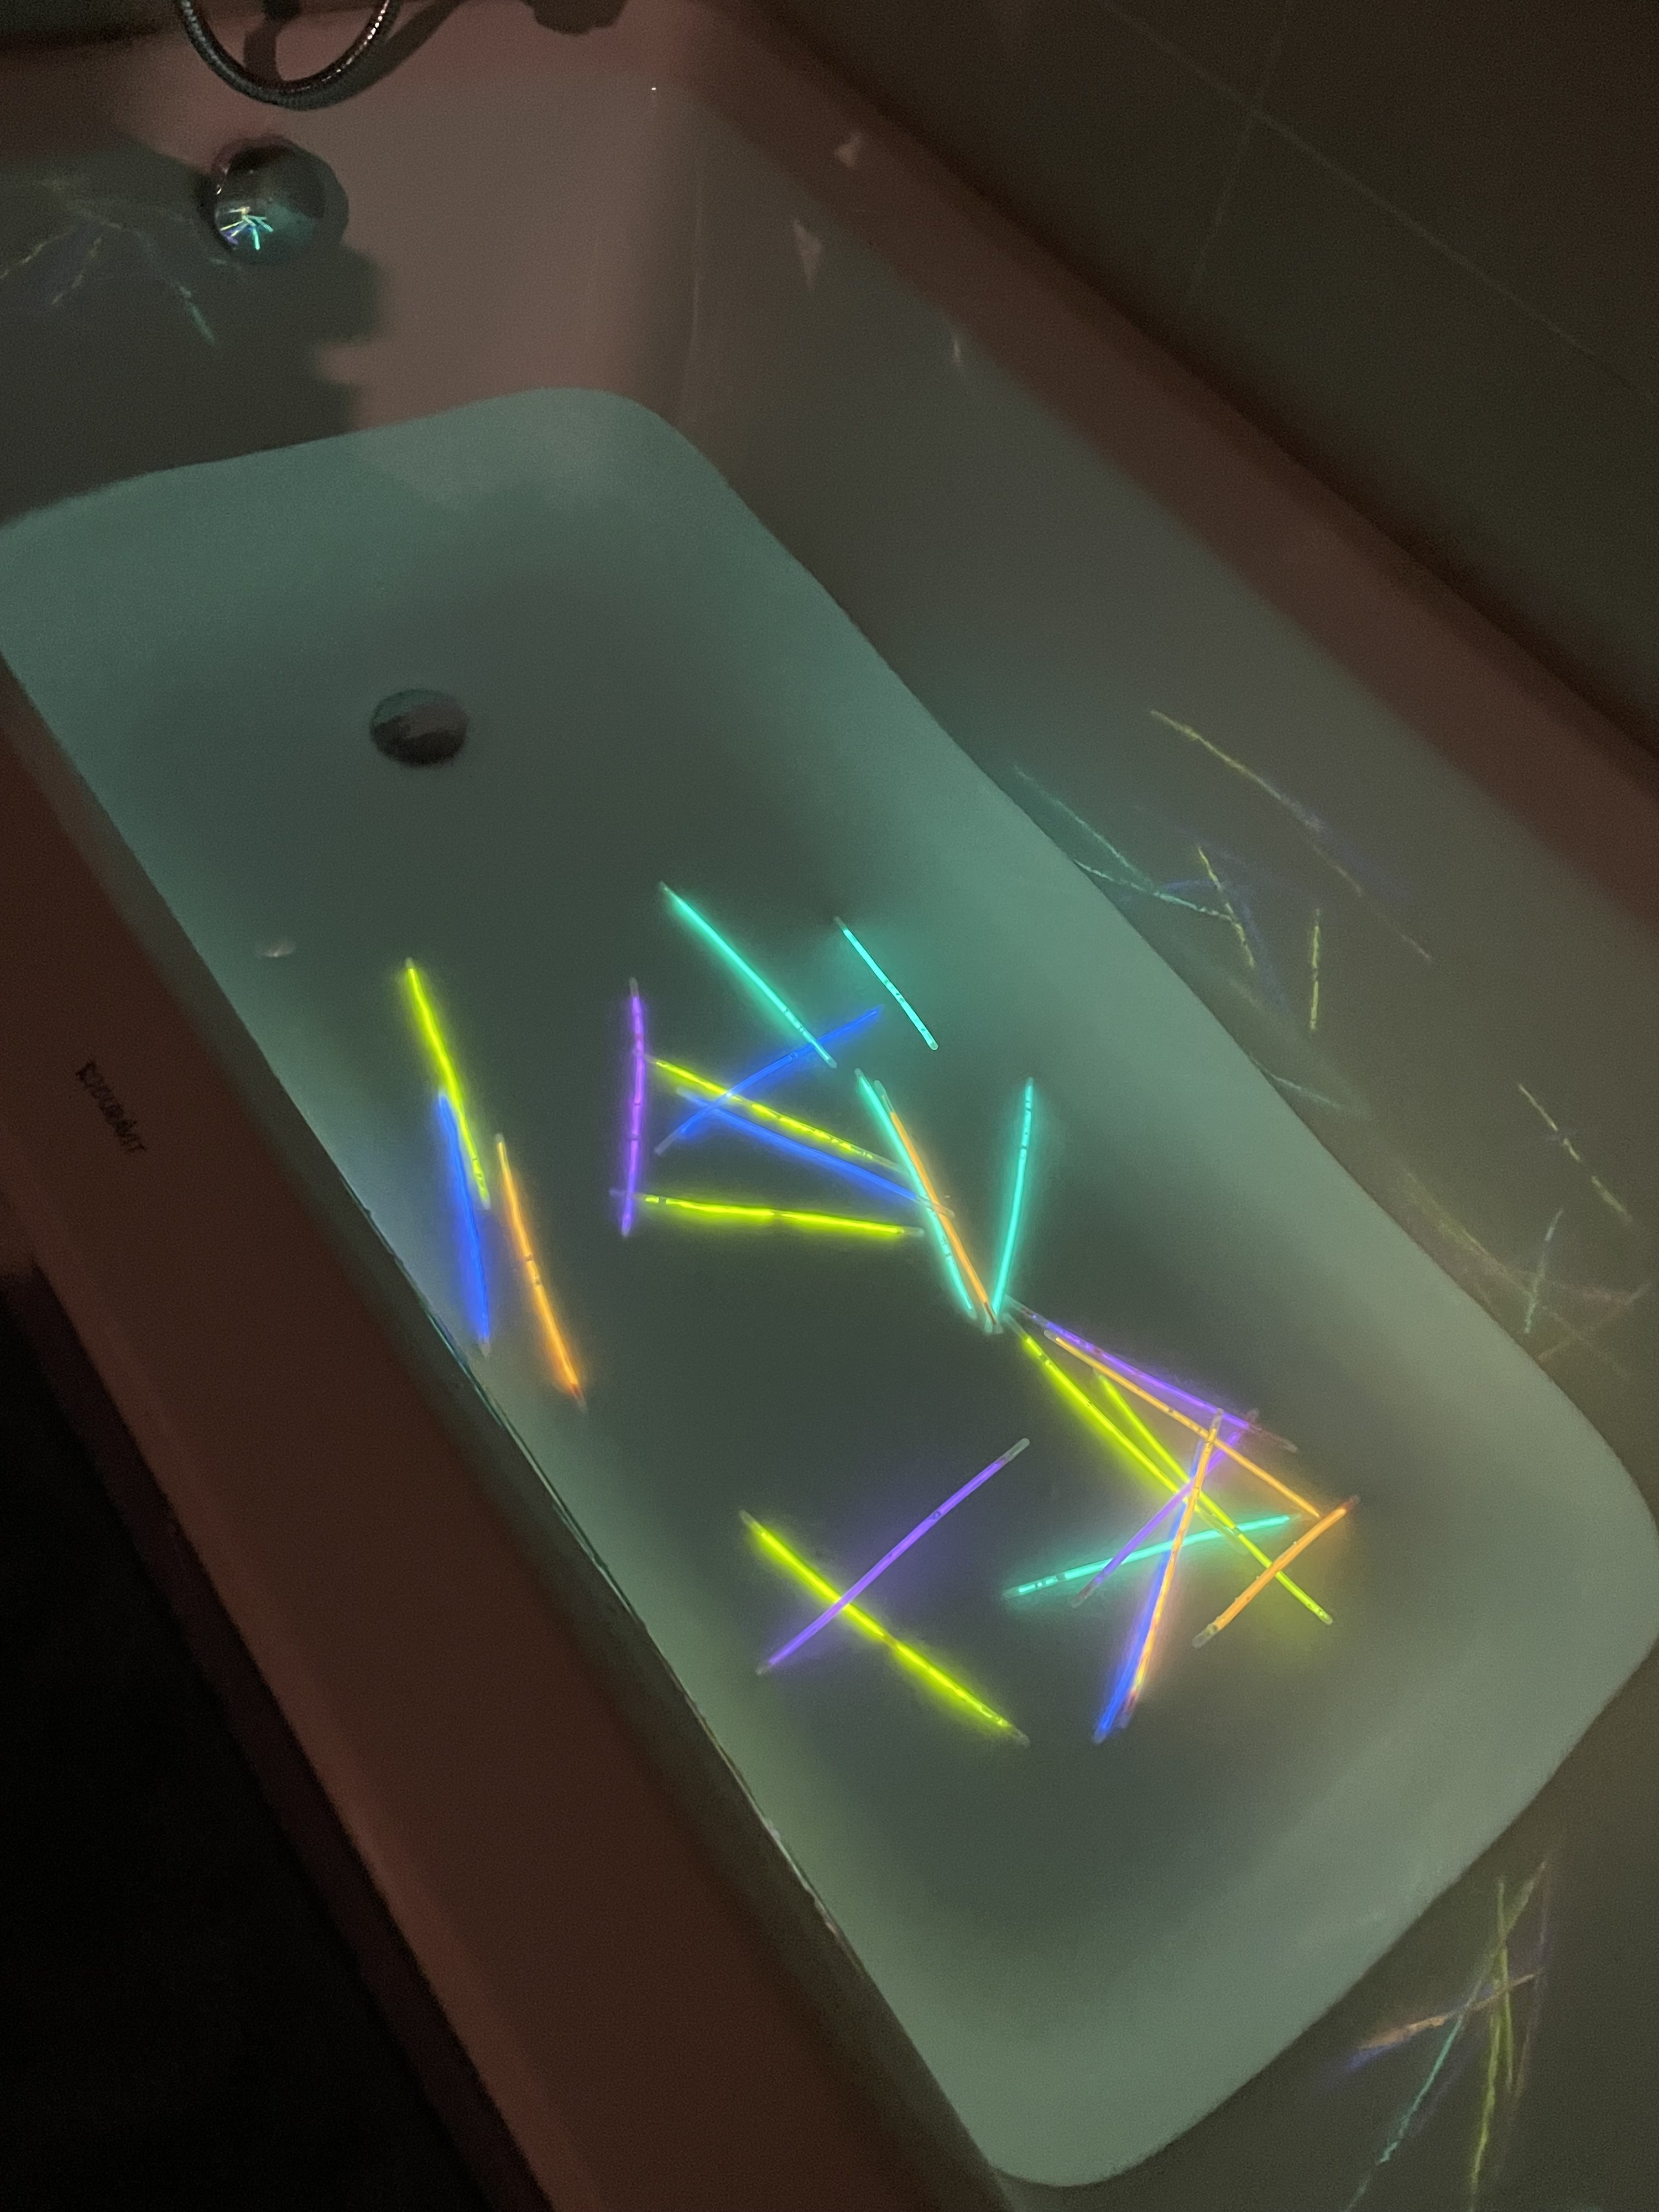 A tub filled with water and about 25 glow sticks